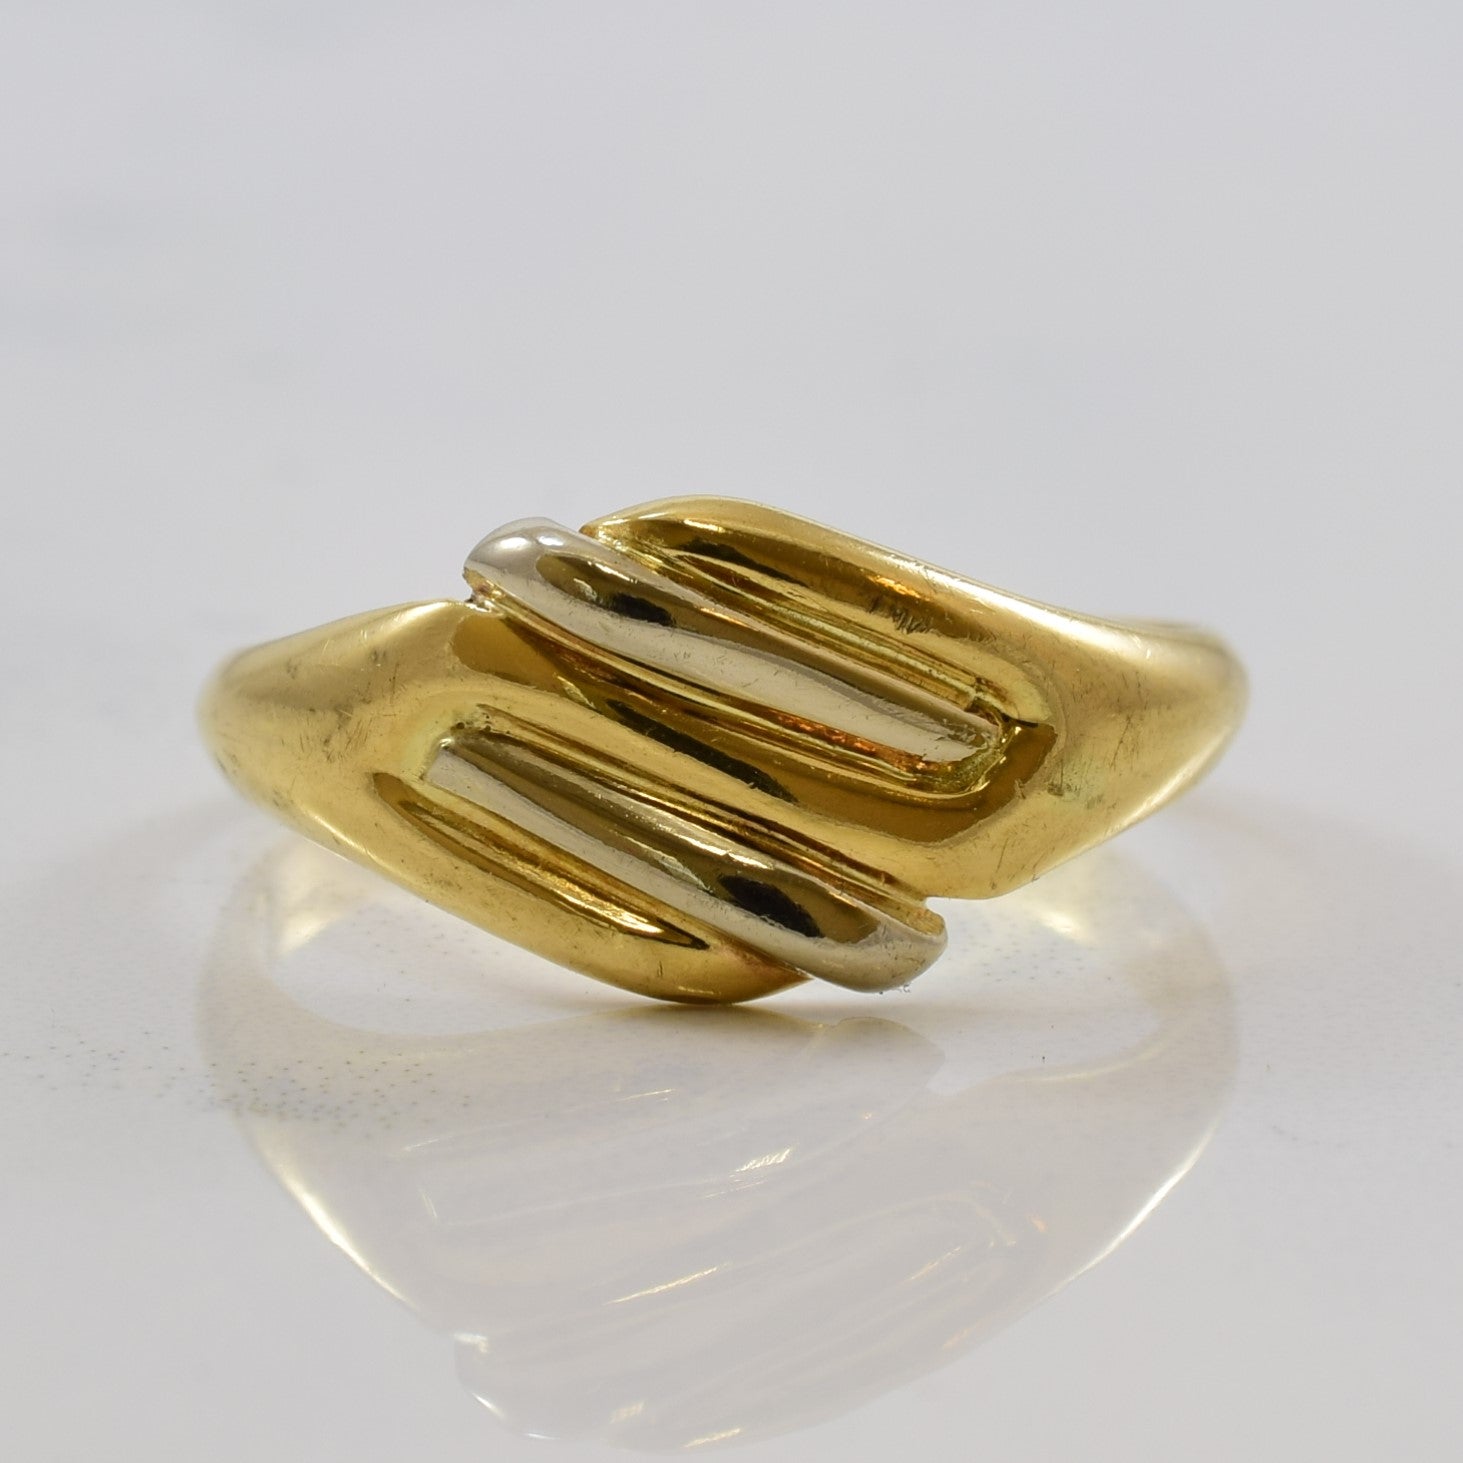 Two Tone Bypass Ring | SZ 7.5 |